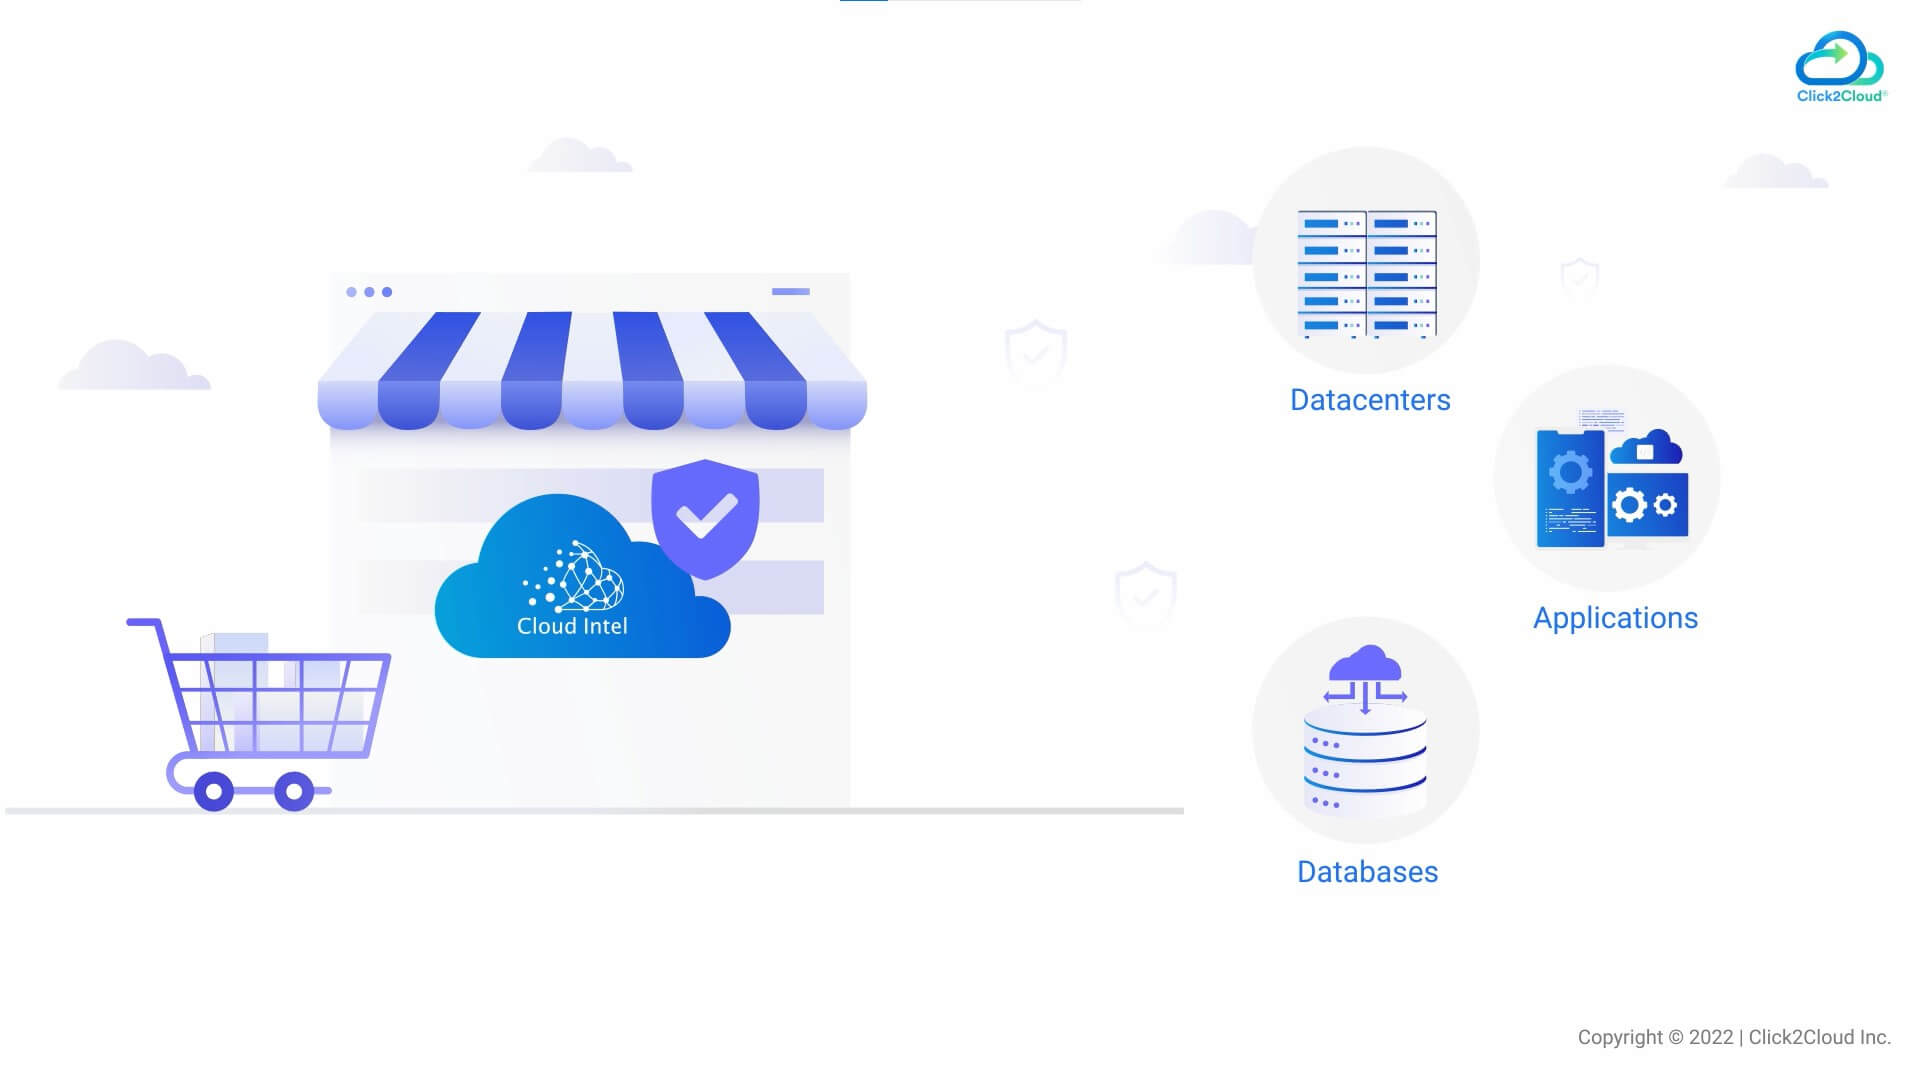 Click2cloud-Cloud Intel - A Catalyst for Innovation in Retail Sector_Video